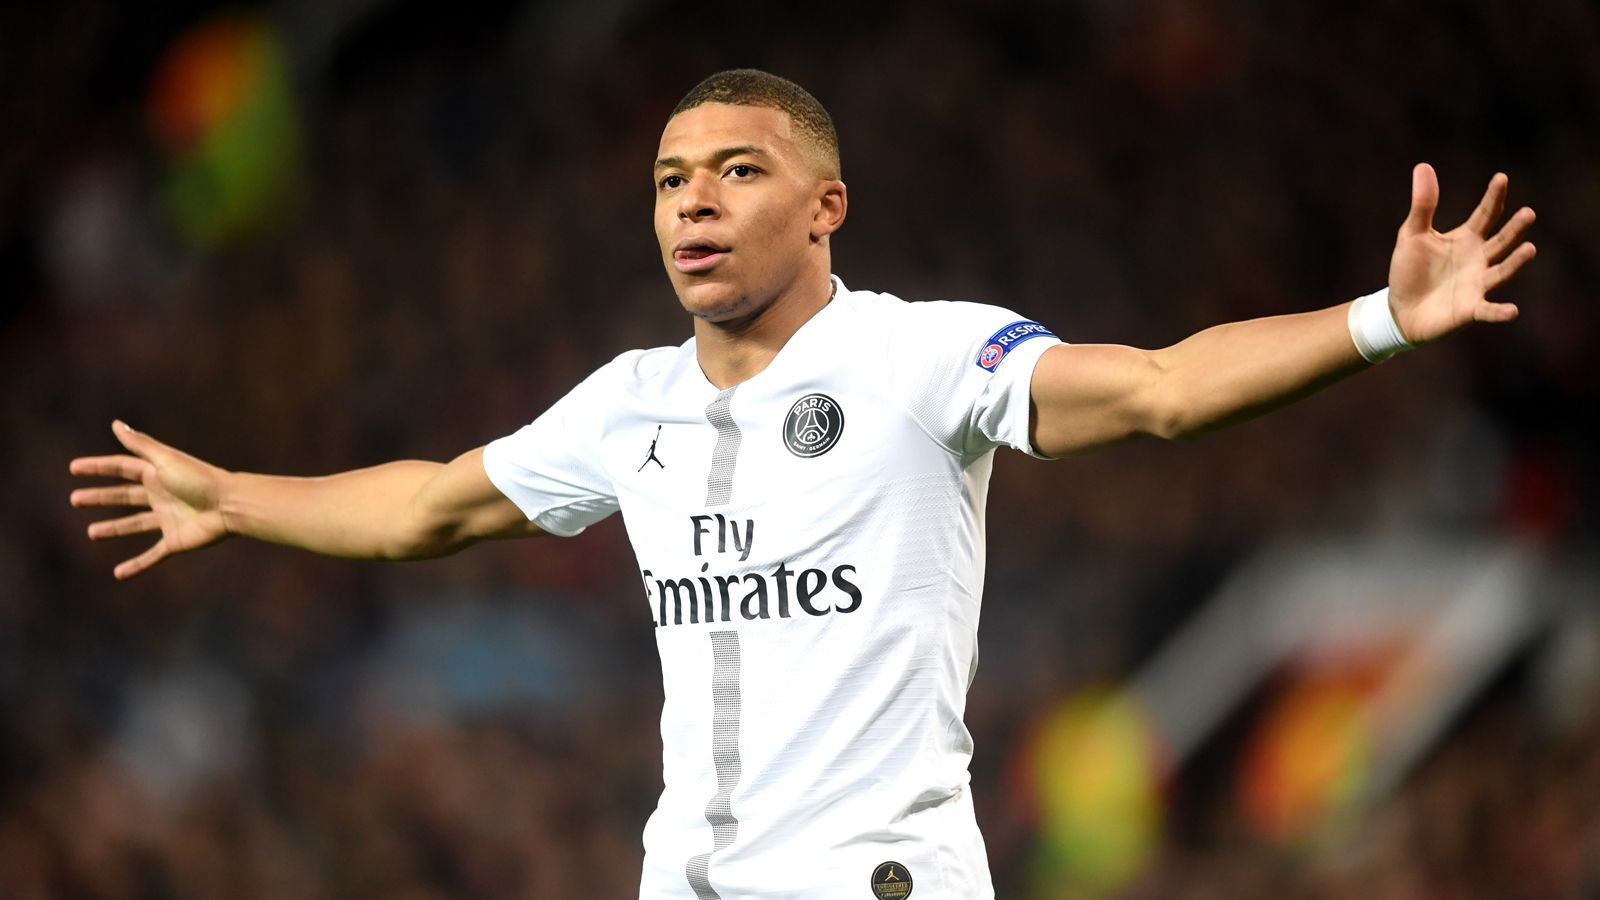 
                <strong>Ligue 1 (Frankreich)</strong><br>
                1. Kylian Mbappe (PSG) 18 Tore    Wissam Ben Yeder (AS Monaco) 18 Tore3. Moussa Dembele (Olympique Lyon) 16 Tore
              